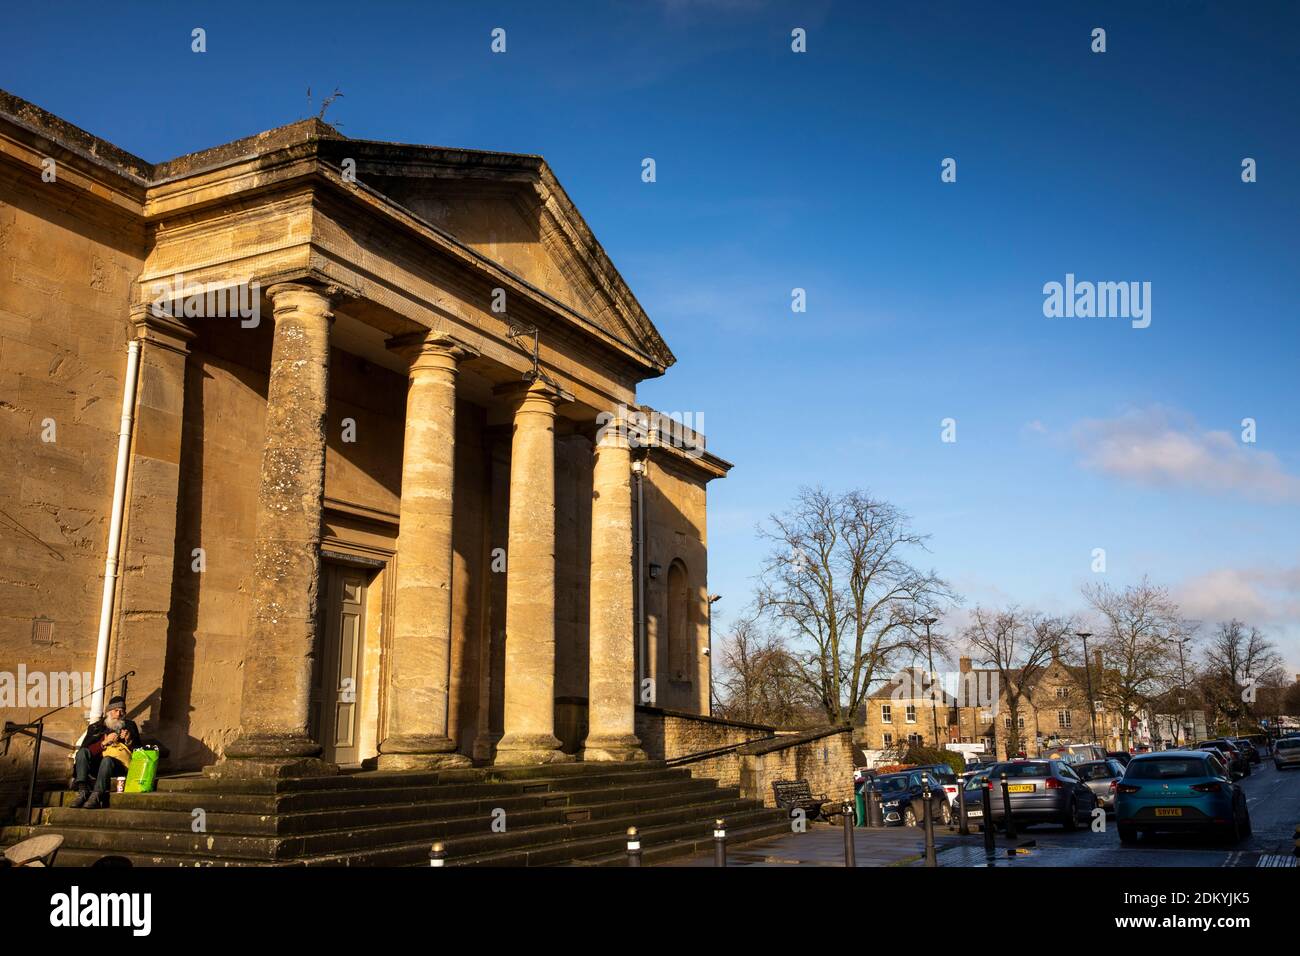 UK, England, Oxfordshire, Chipping Norton, High Street, 1842 Town Hall, neoclassical collonaded portico Stock Photo